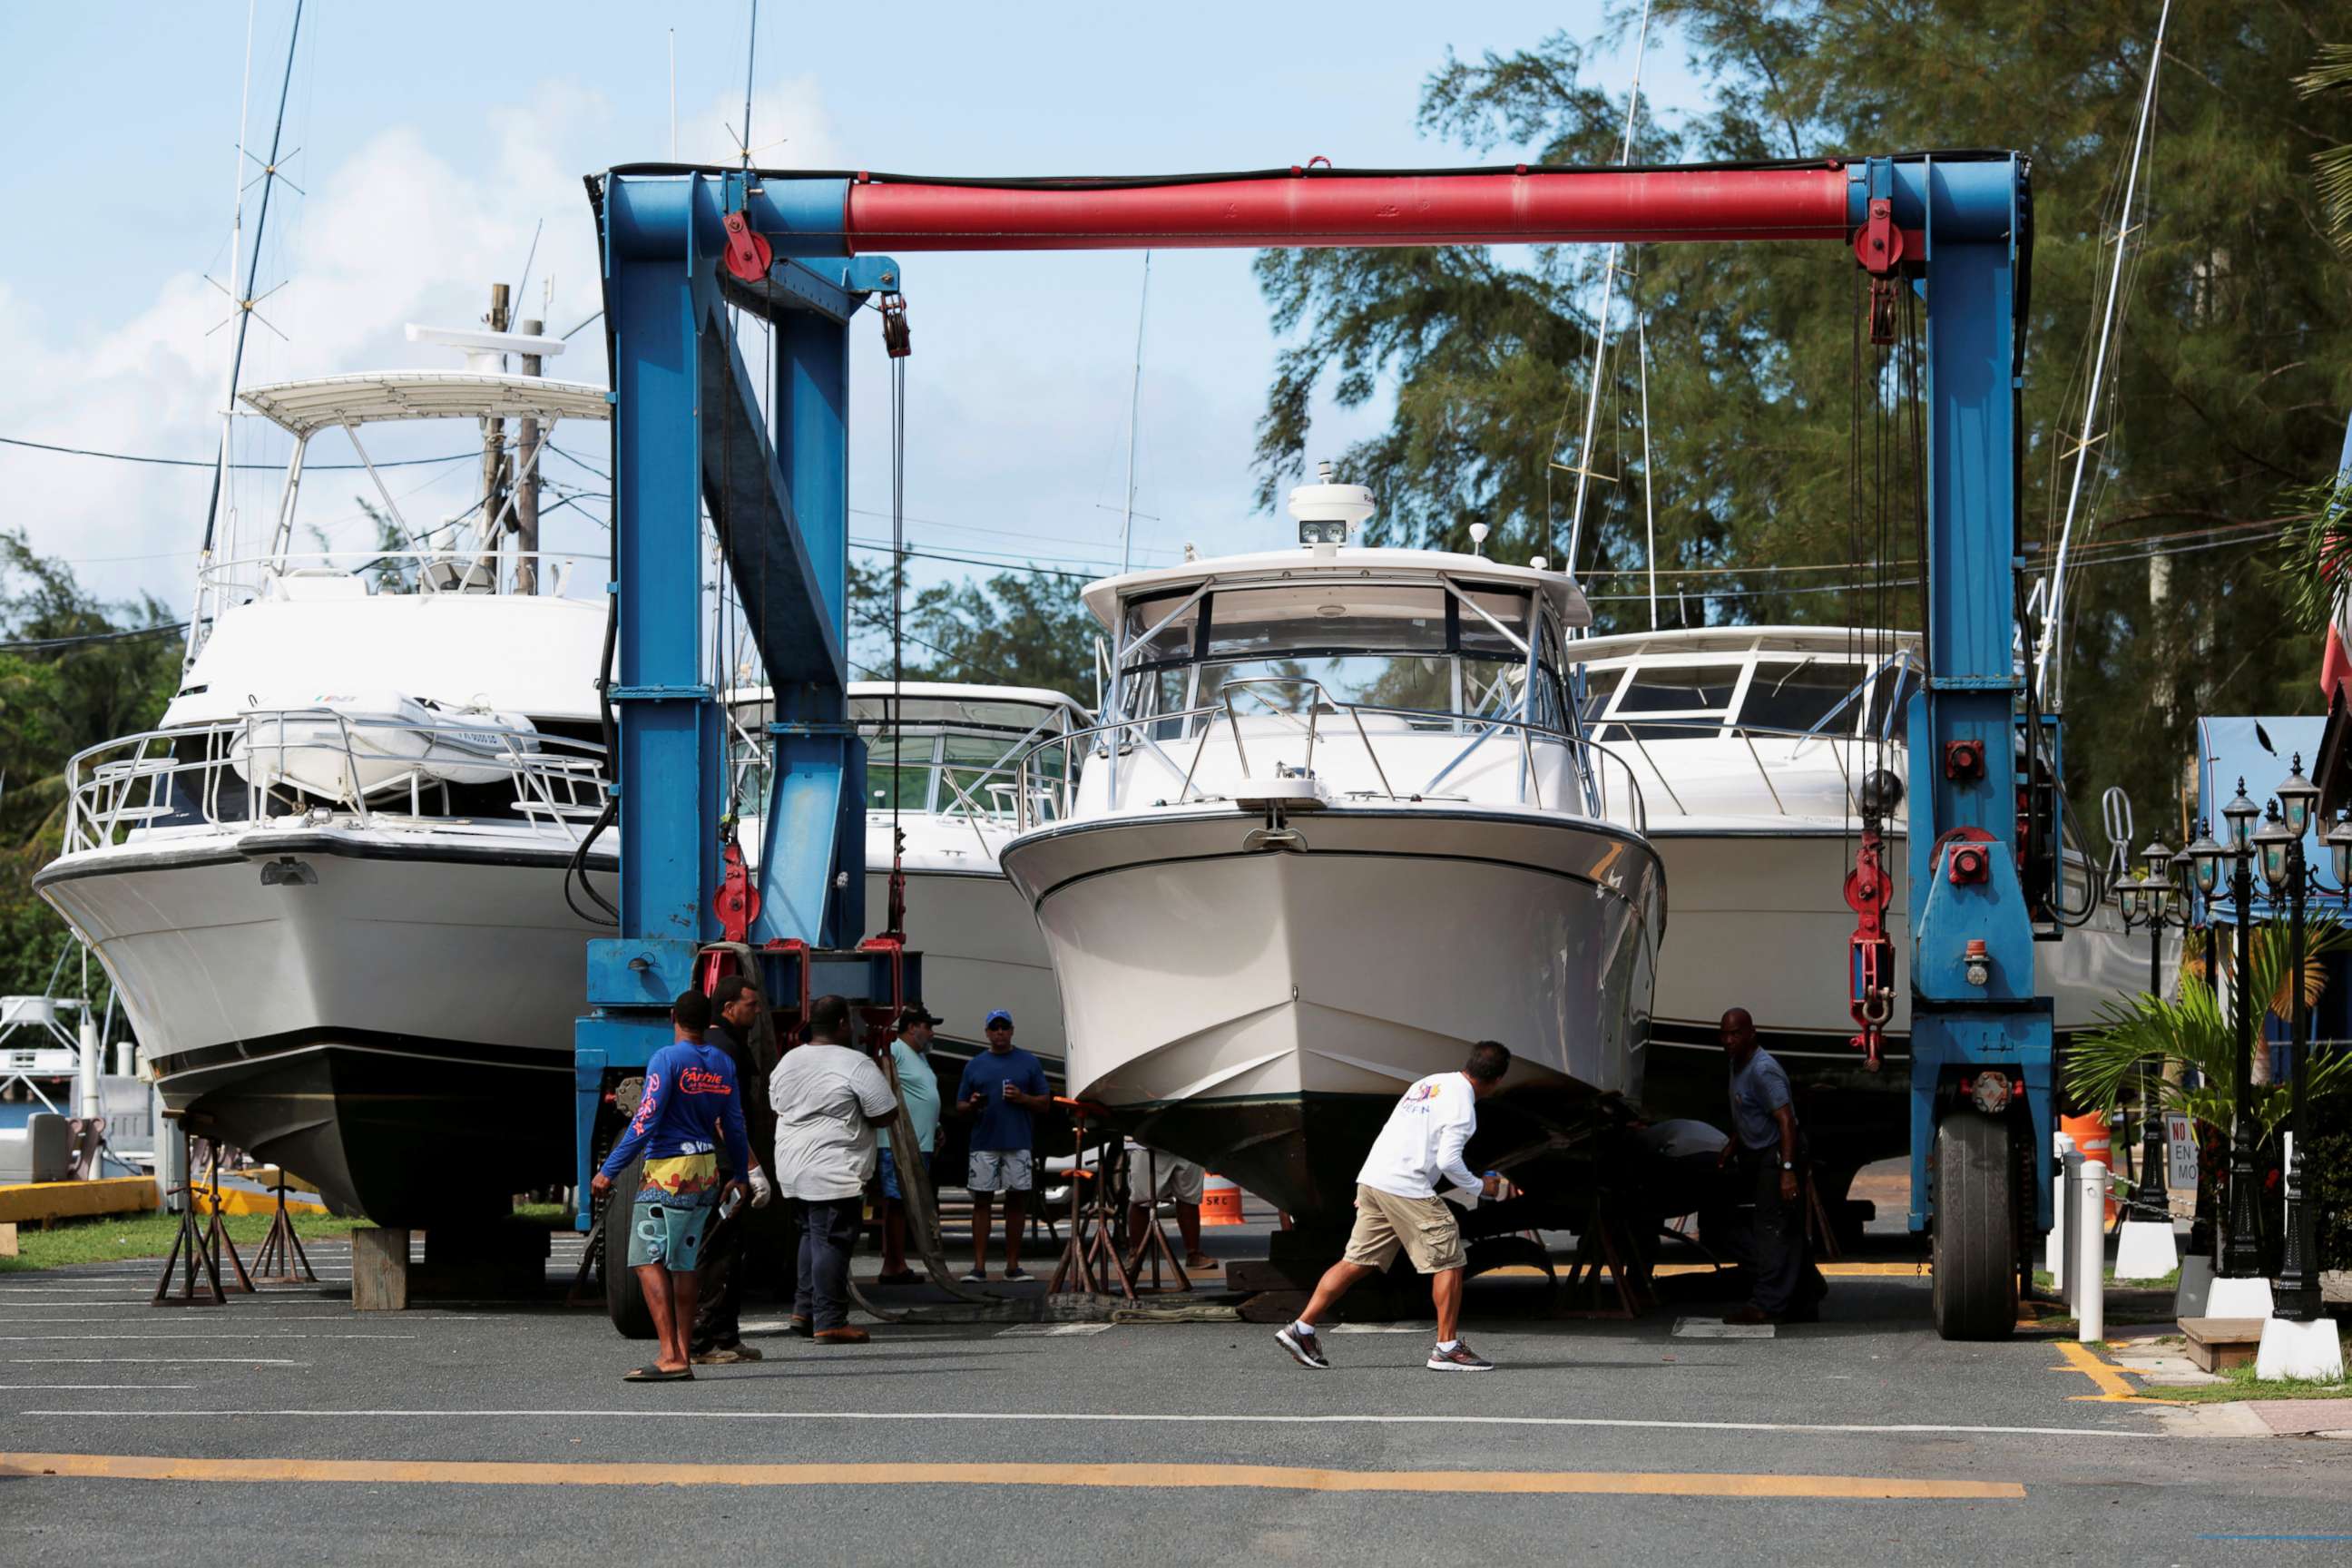 PHOTO: Workers put boats on dry docks in preparation, as Hurricane Irma, barreling towards the Caribbean and the southern United States, was upgraded to a Category 4 storm, in San Juan, Puerto Rico, Sept. 4, 2017.